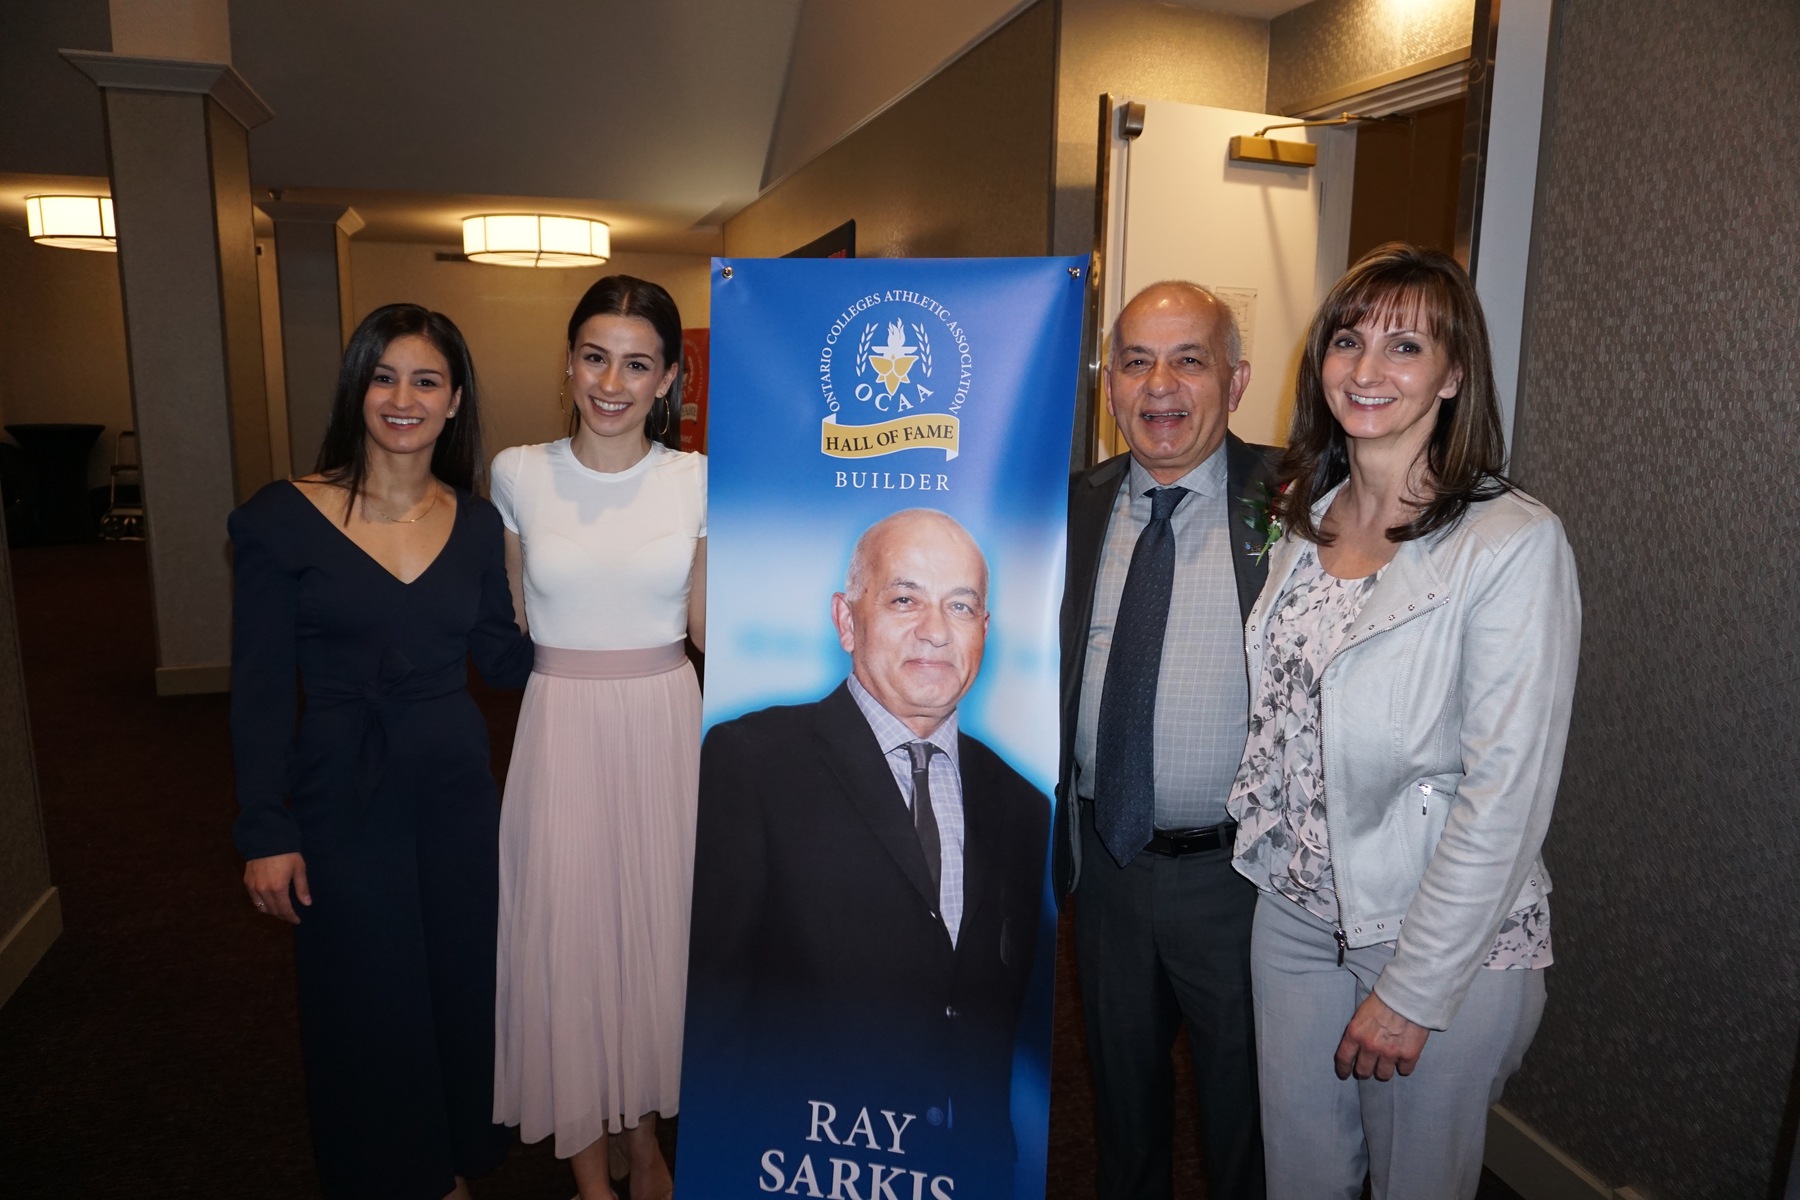 OCAA Hall of Fame inductee Ray Sarkis with his wife, Marilyn, and daughters, Ava and Hillary.